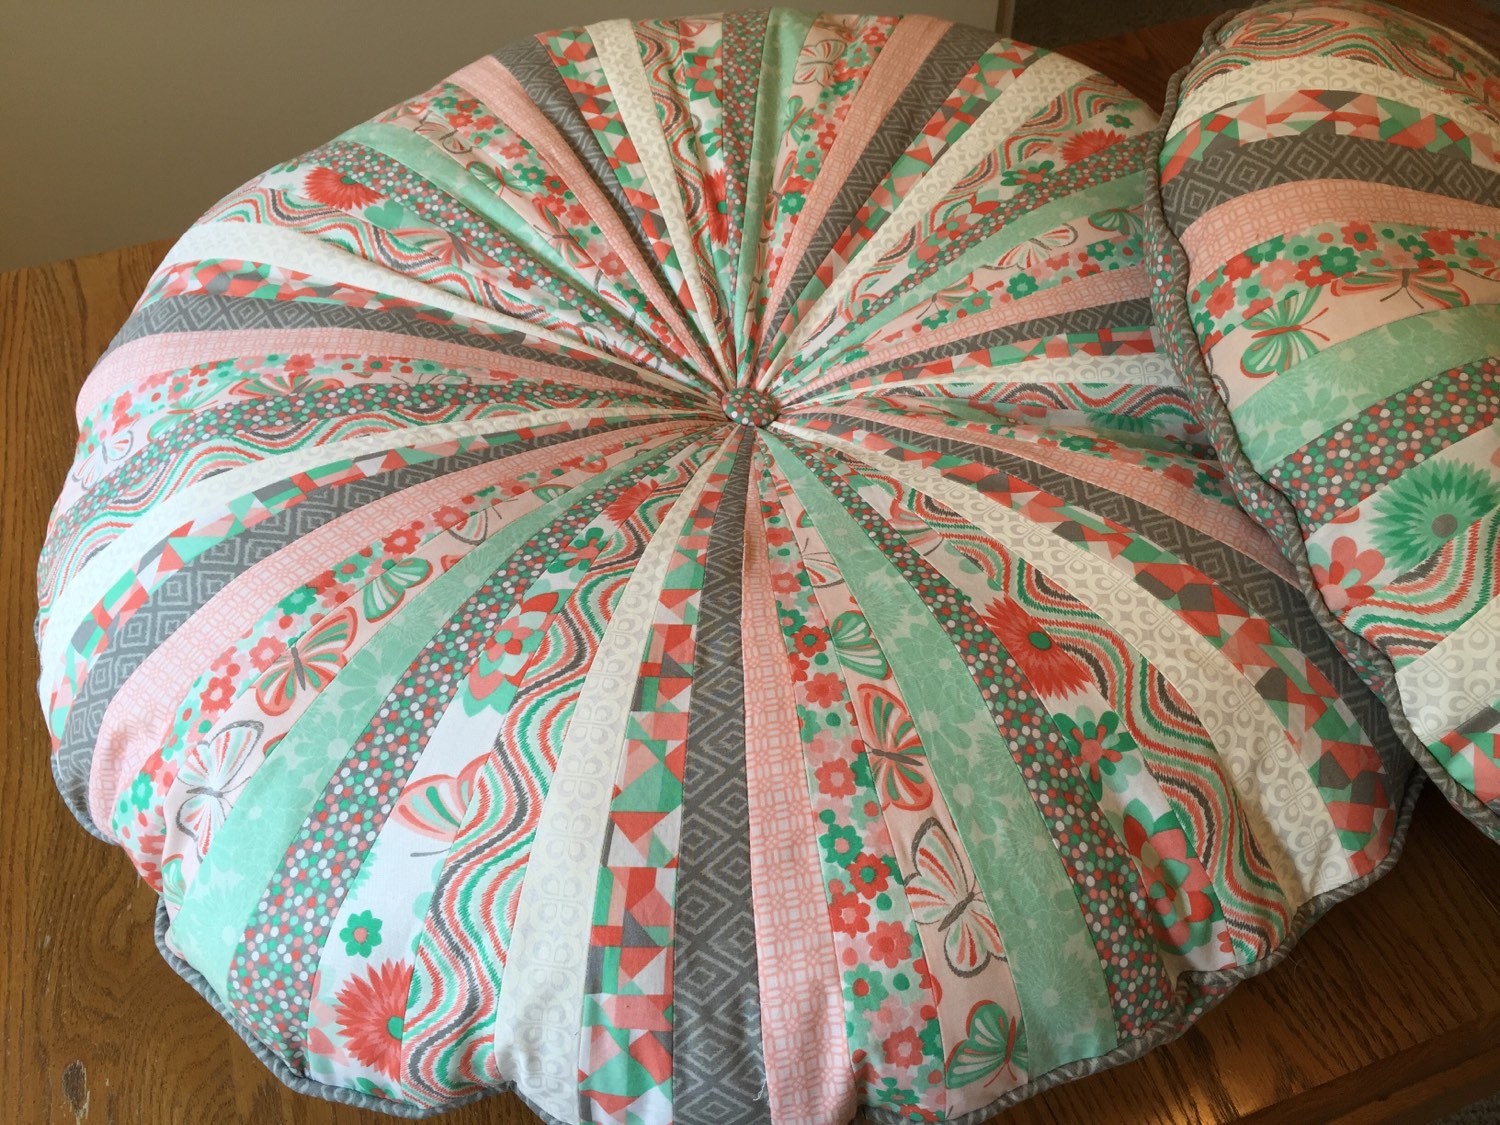 Set of 2 large round floor pillows